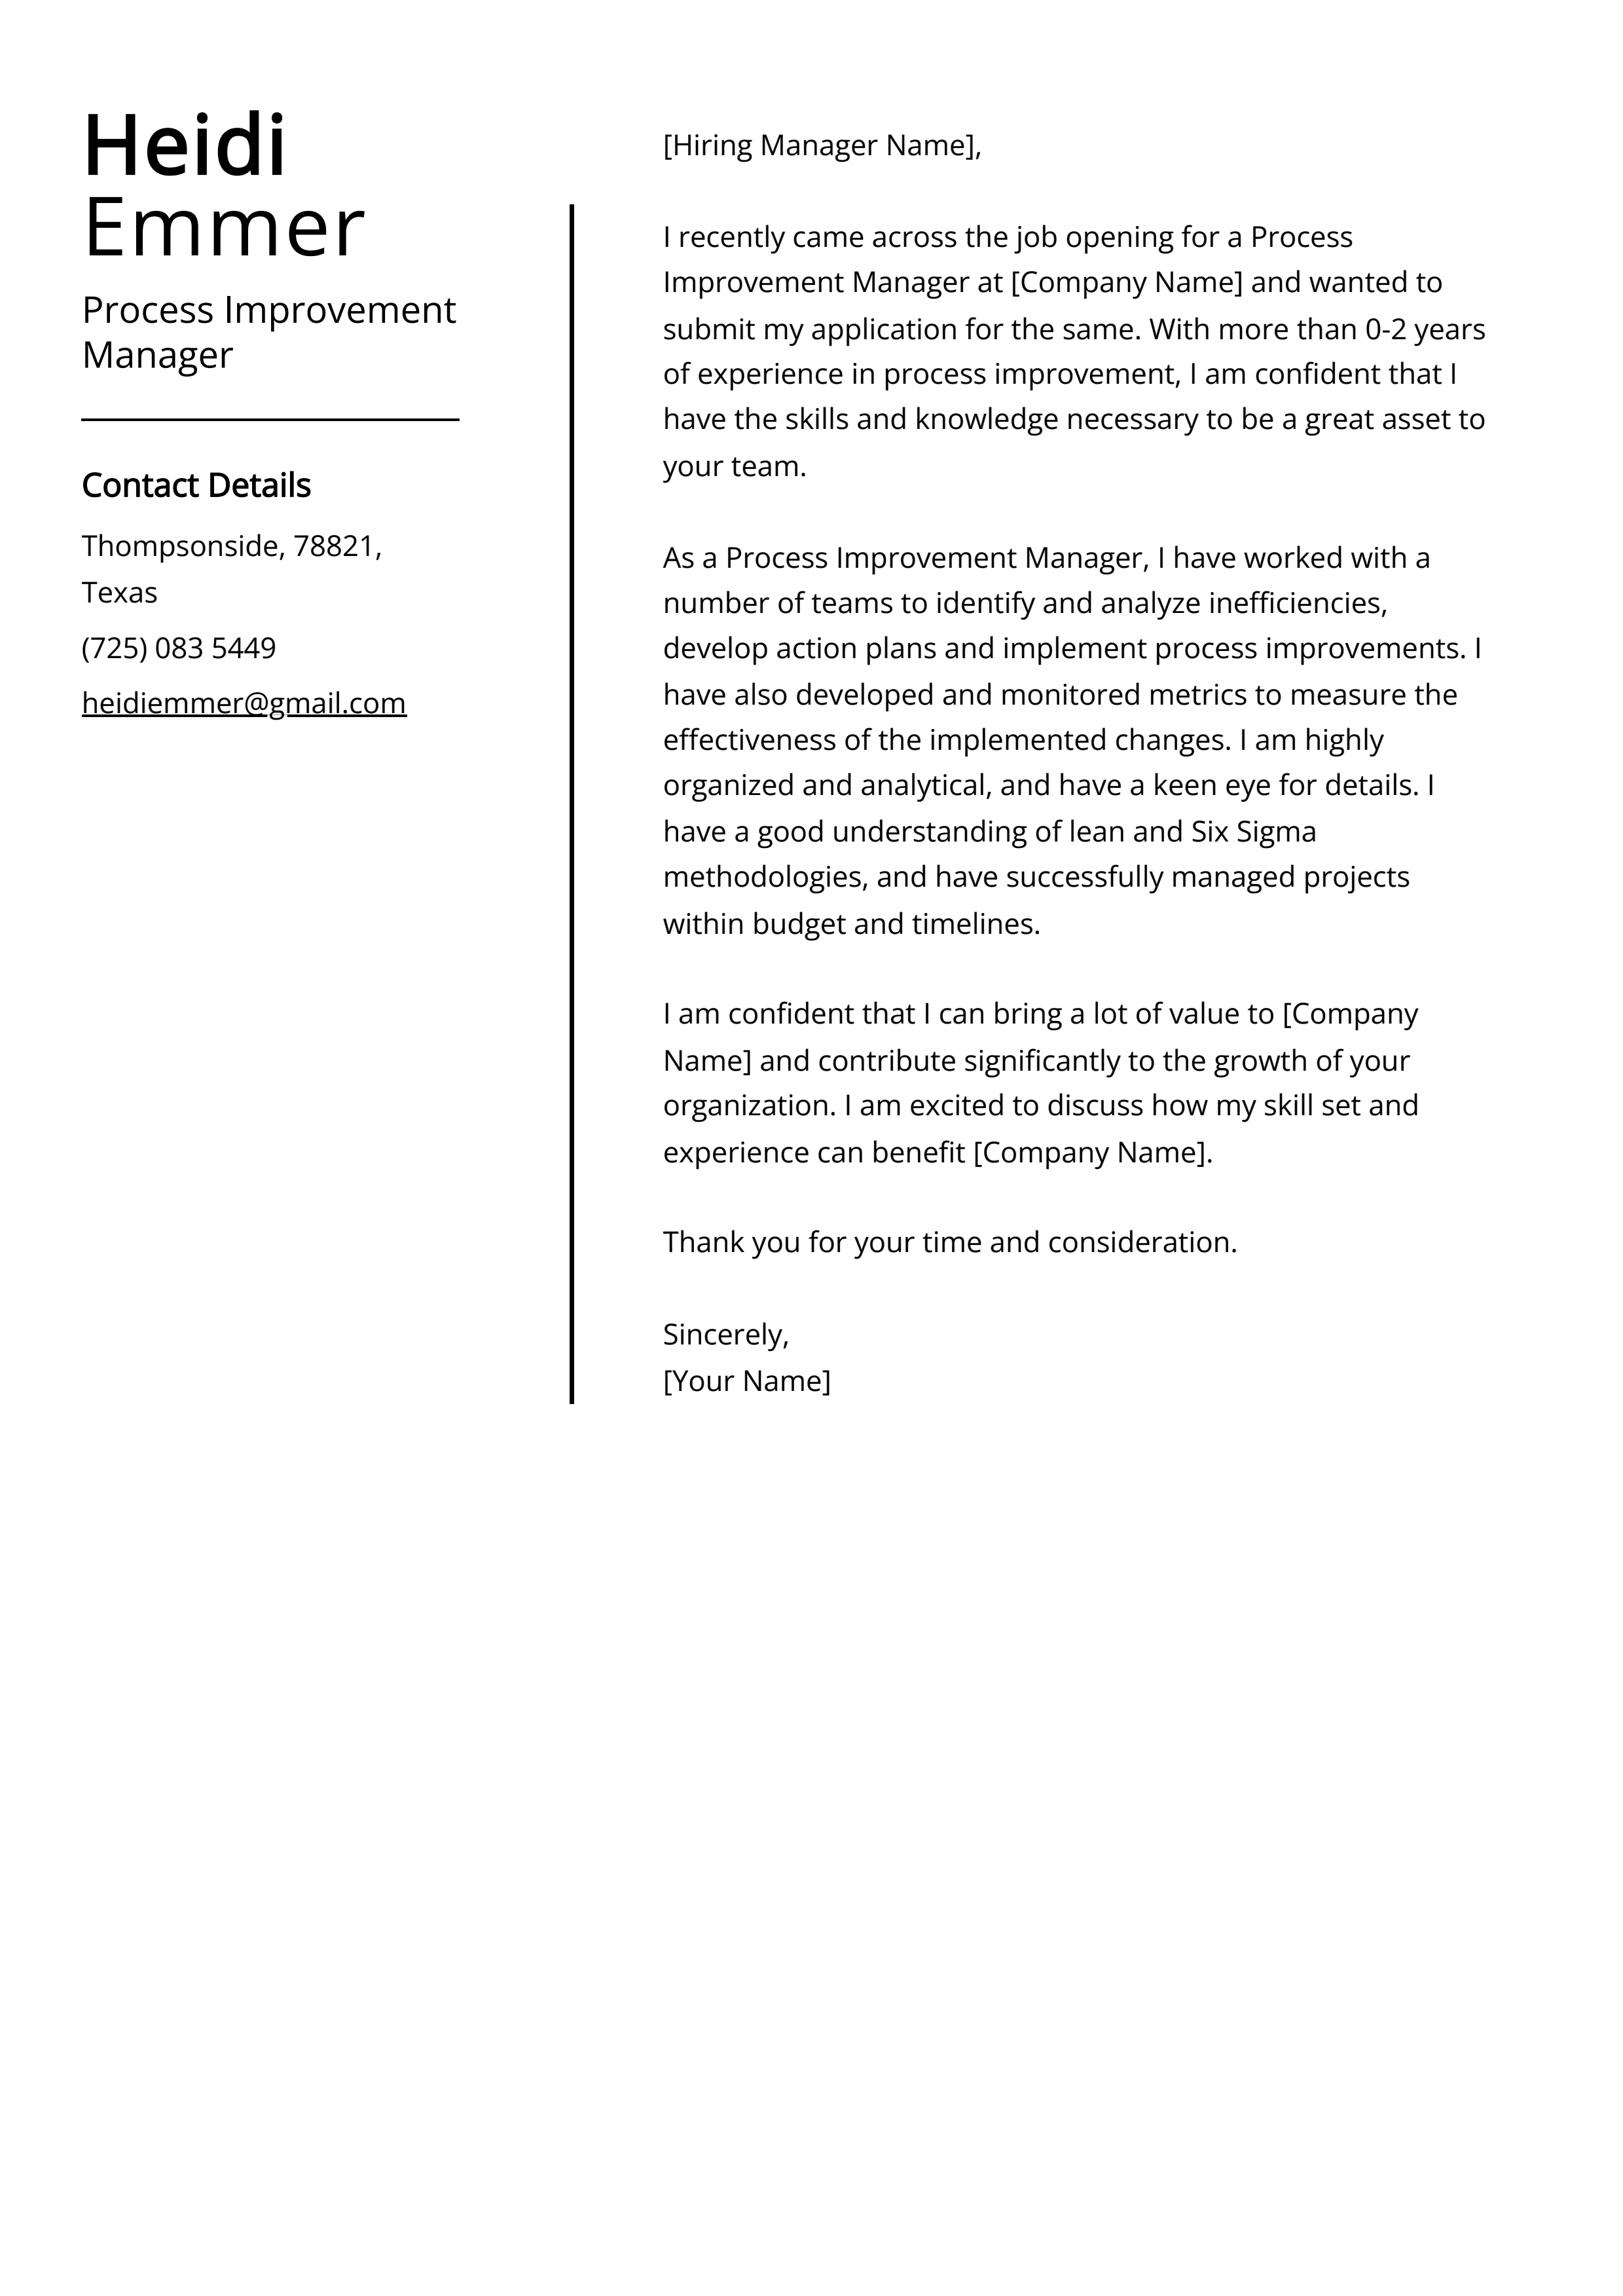 Process Improvement Manager Cover Letter Example